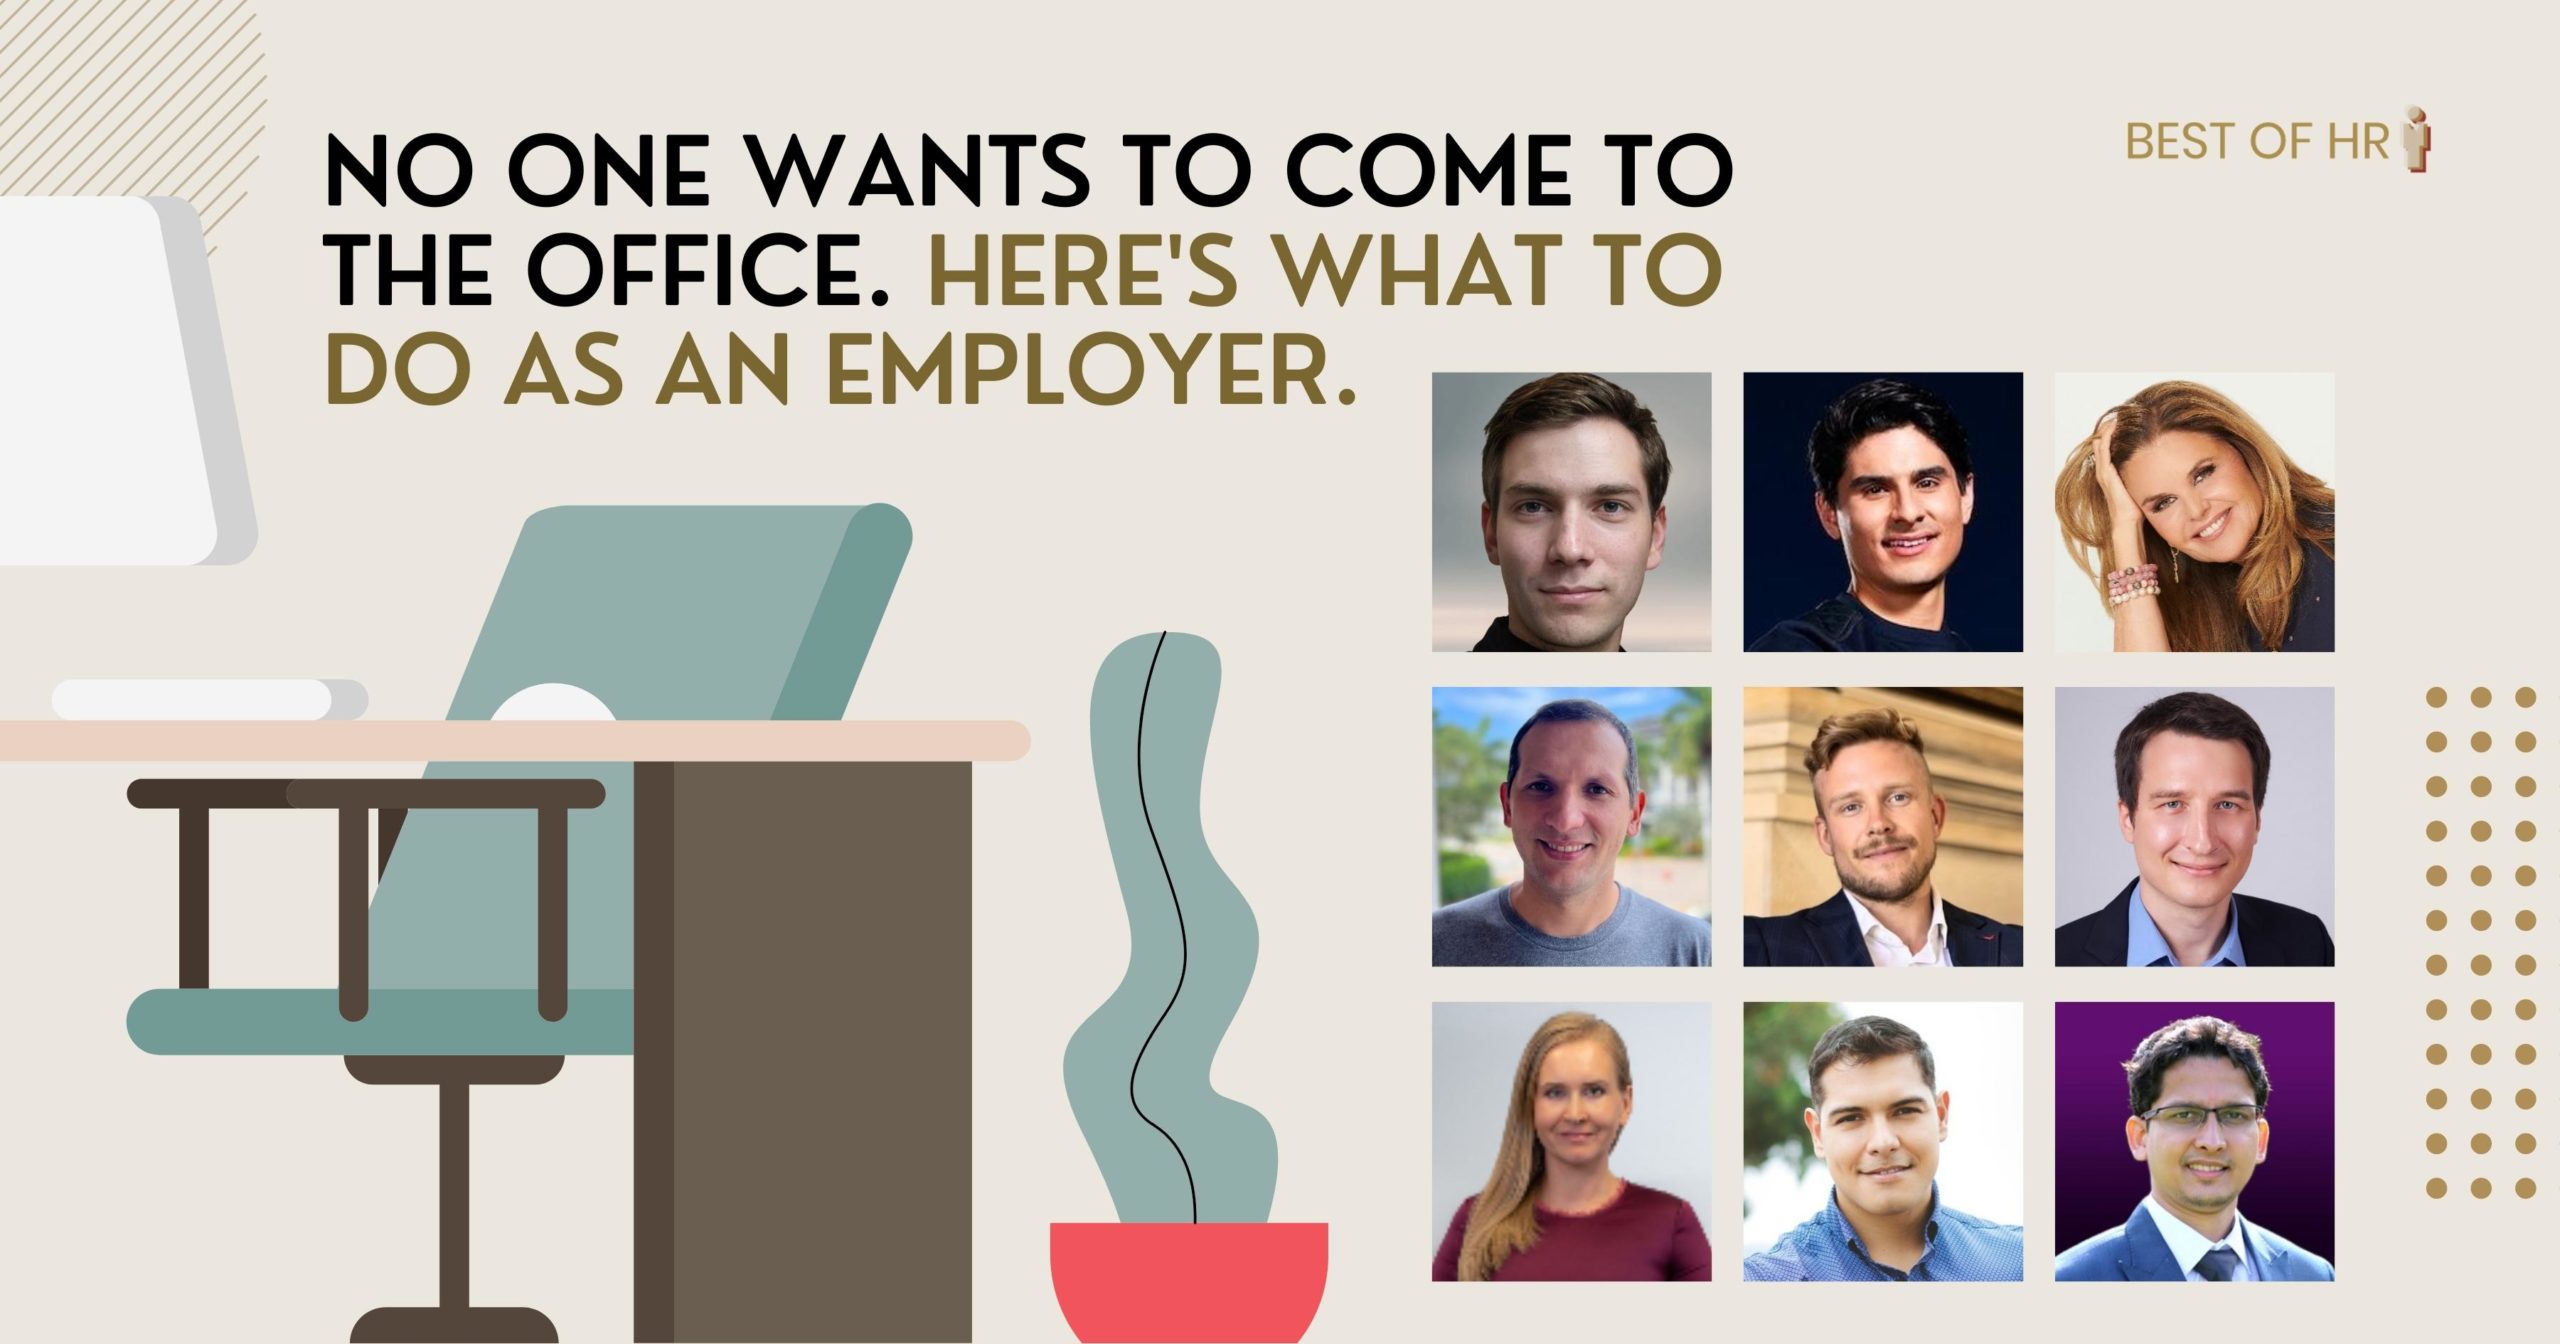 No One Wants to Comes to the Office. Here's What to do as an Employer